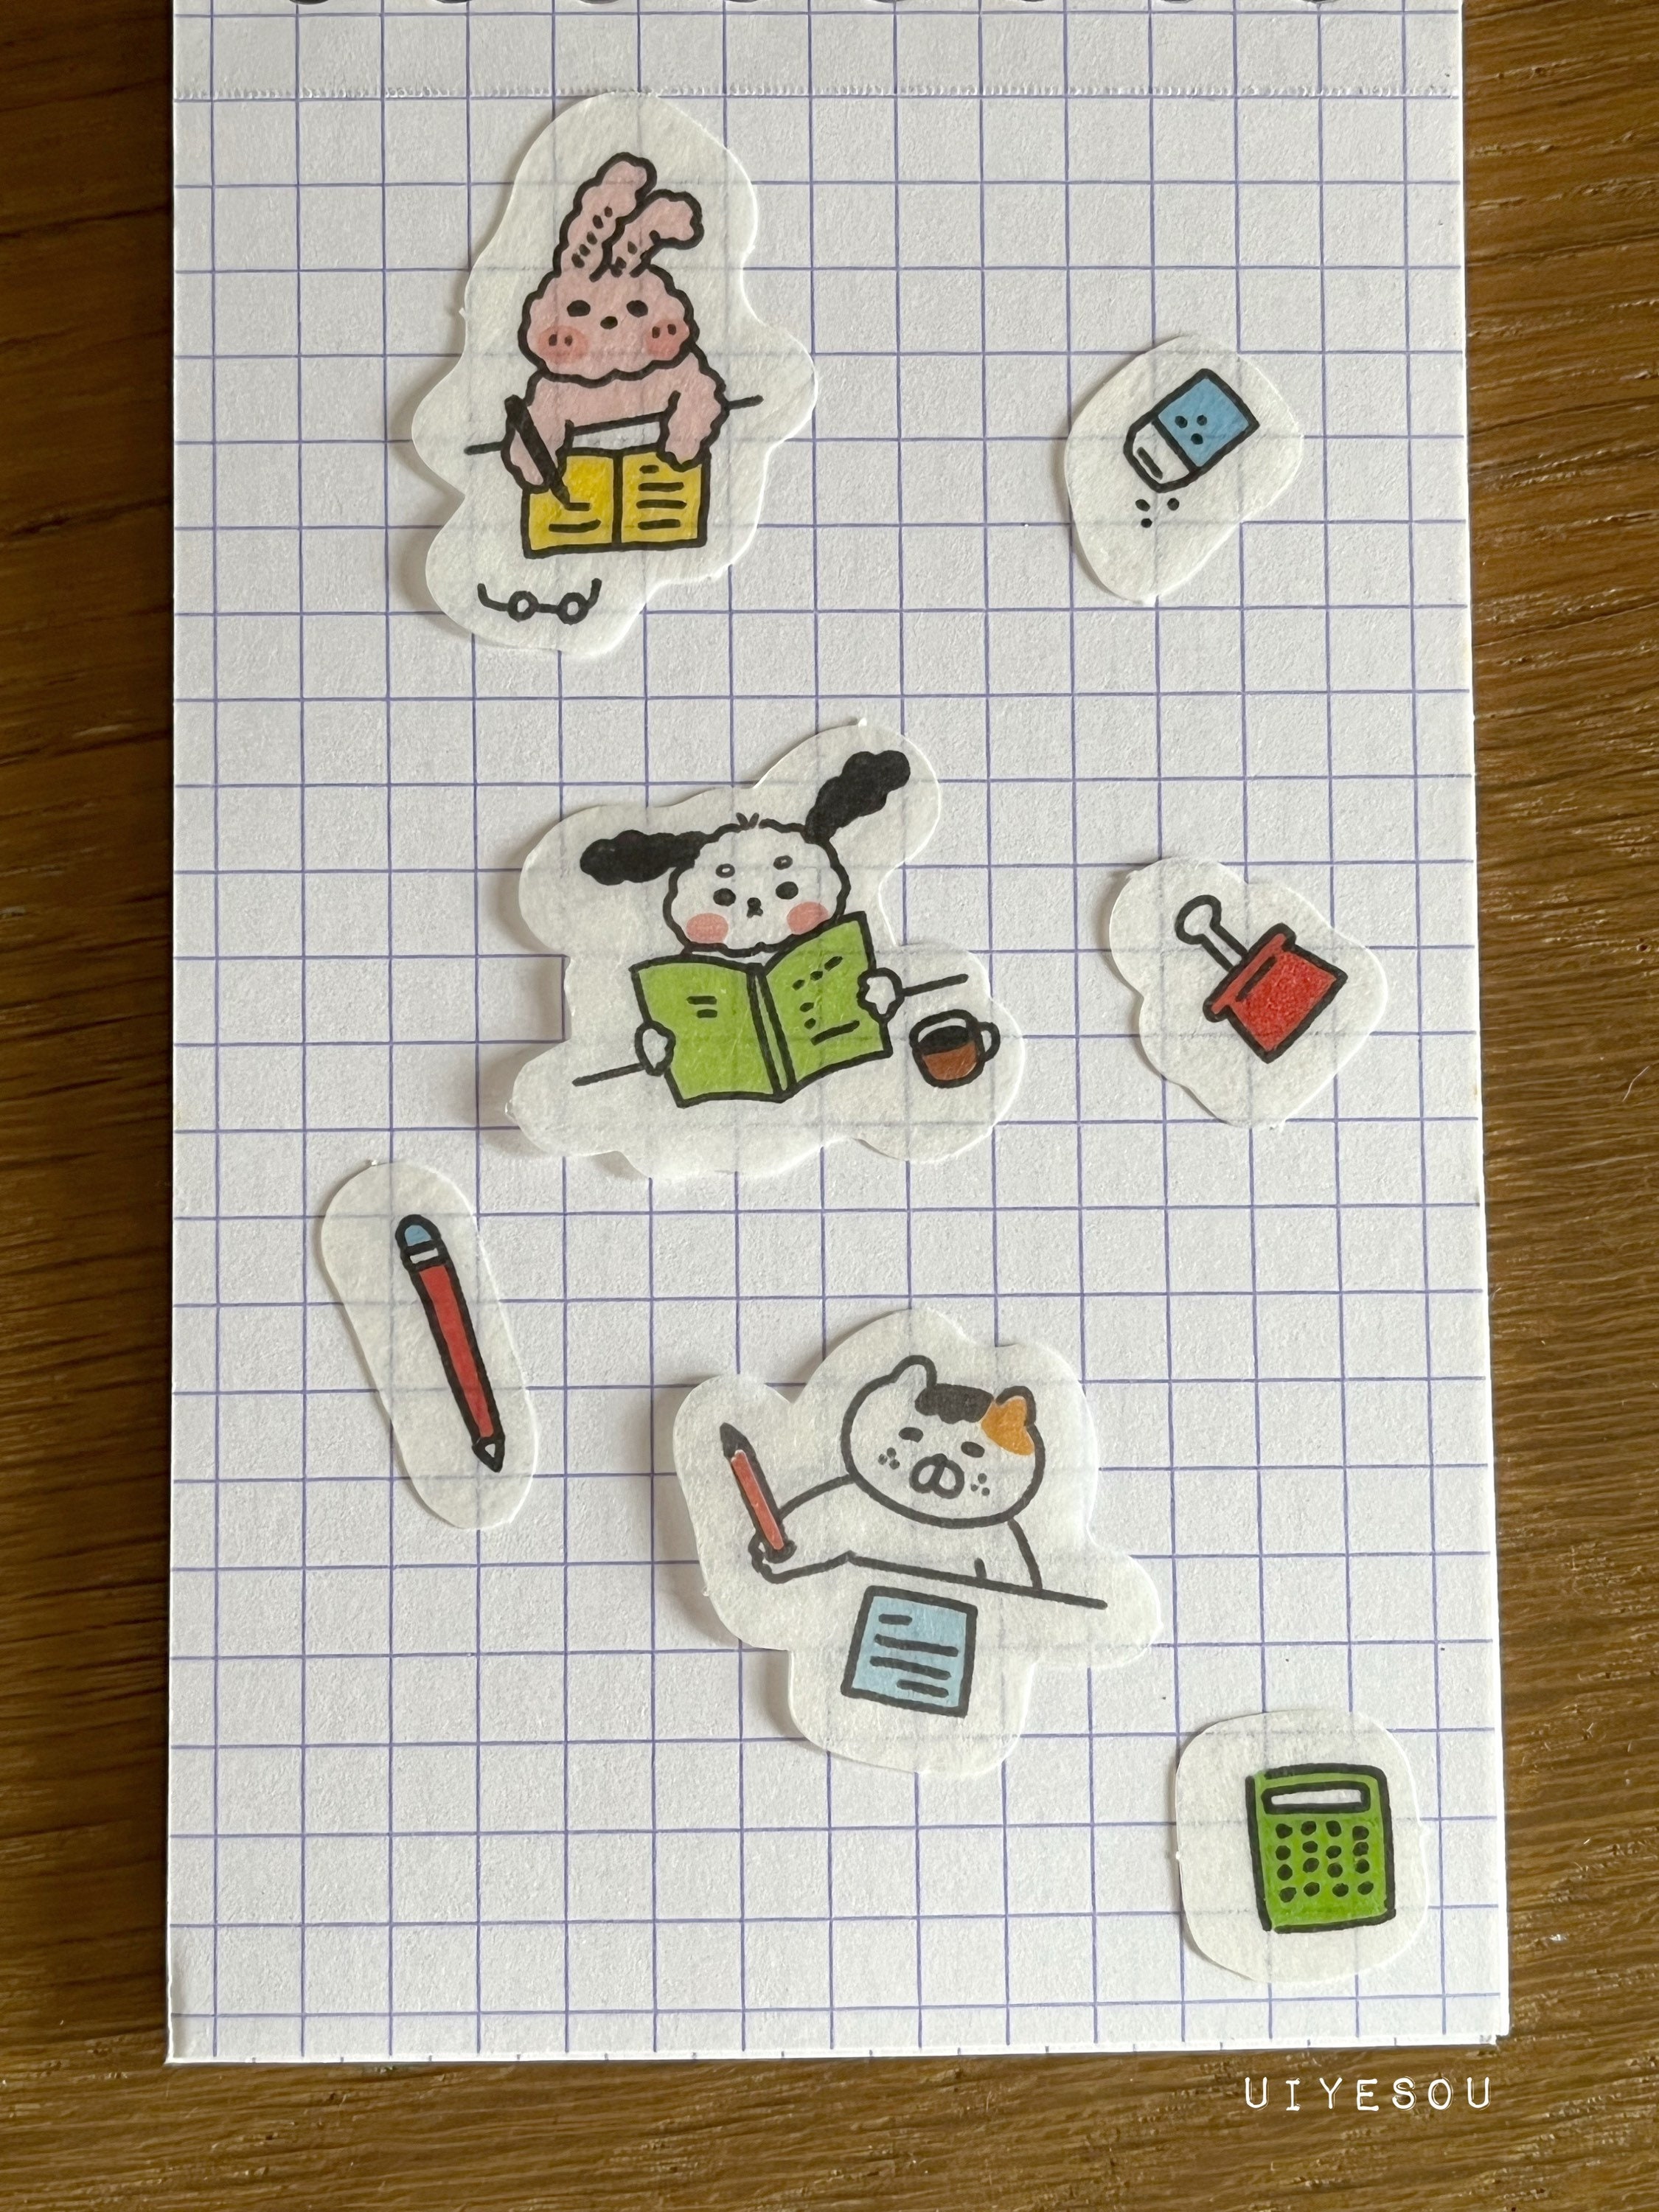 Pet Stickers holiday: 20pcs Kawaii Stickers for Journaling Cute Japanese  Designs for Snailmail Penpals Journaling Birthday 